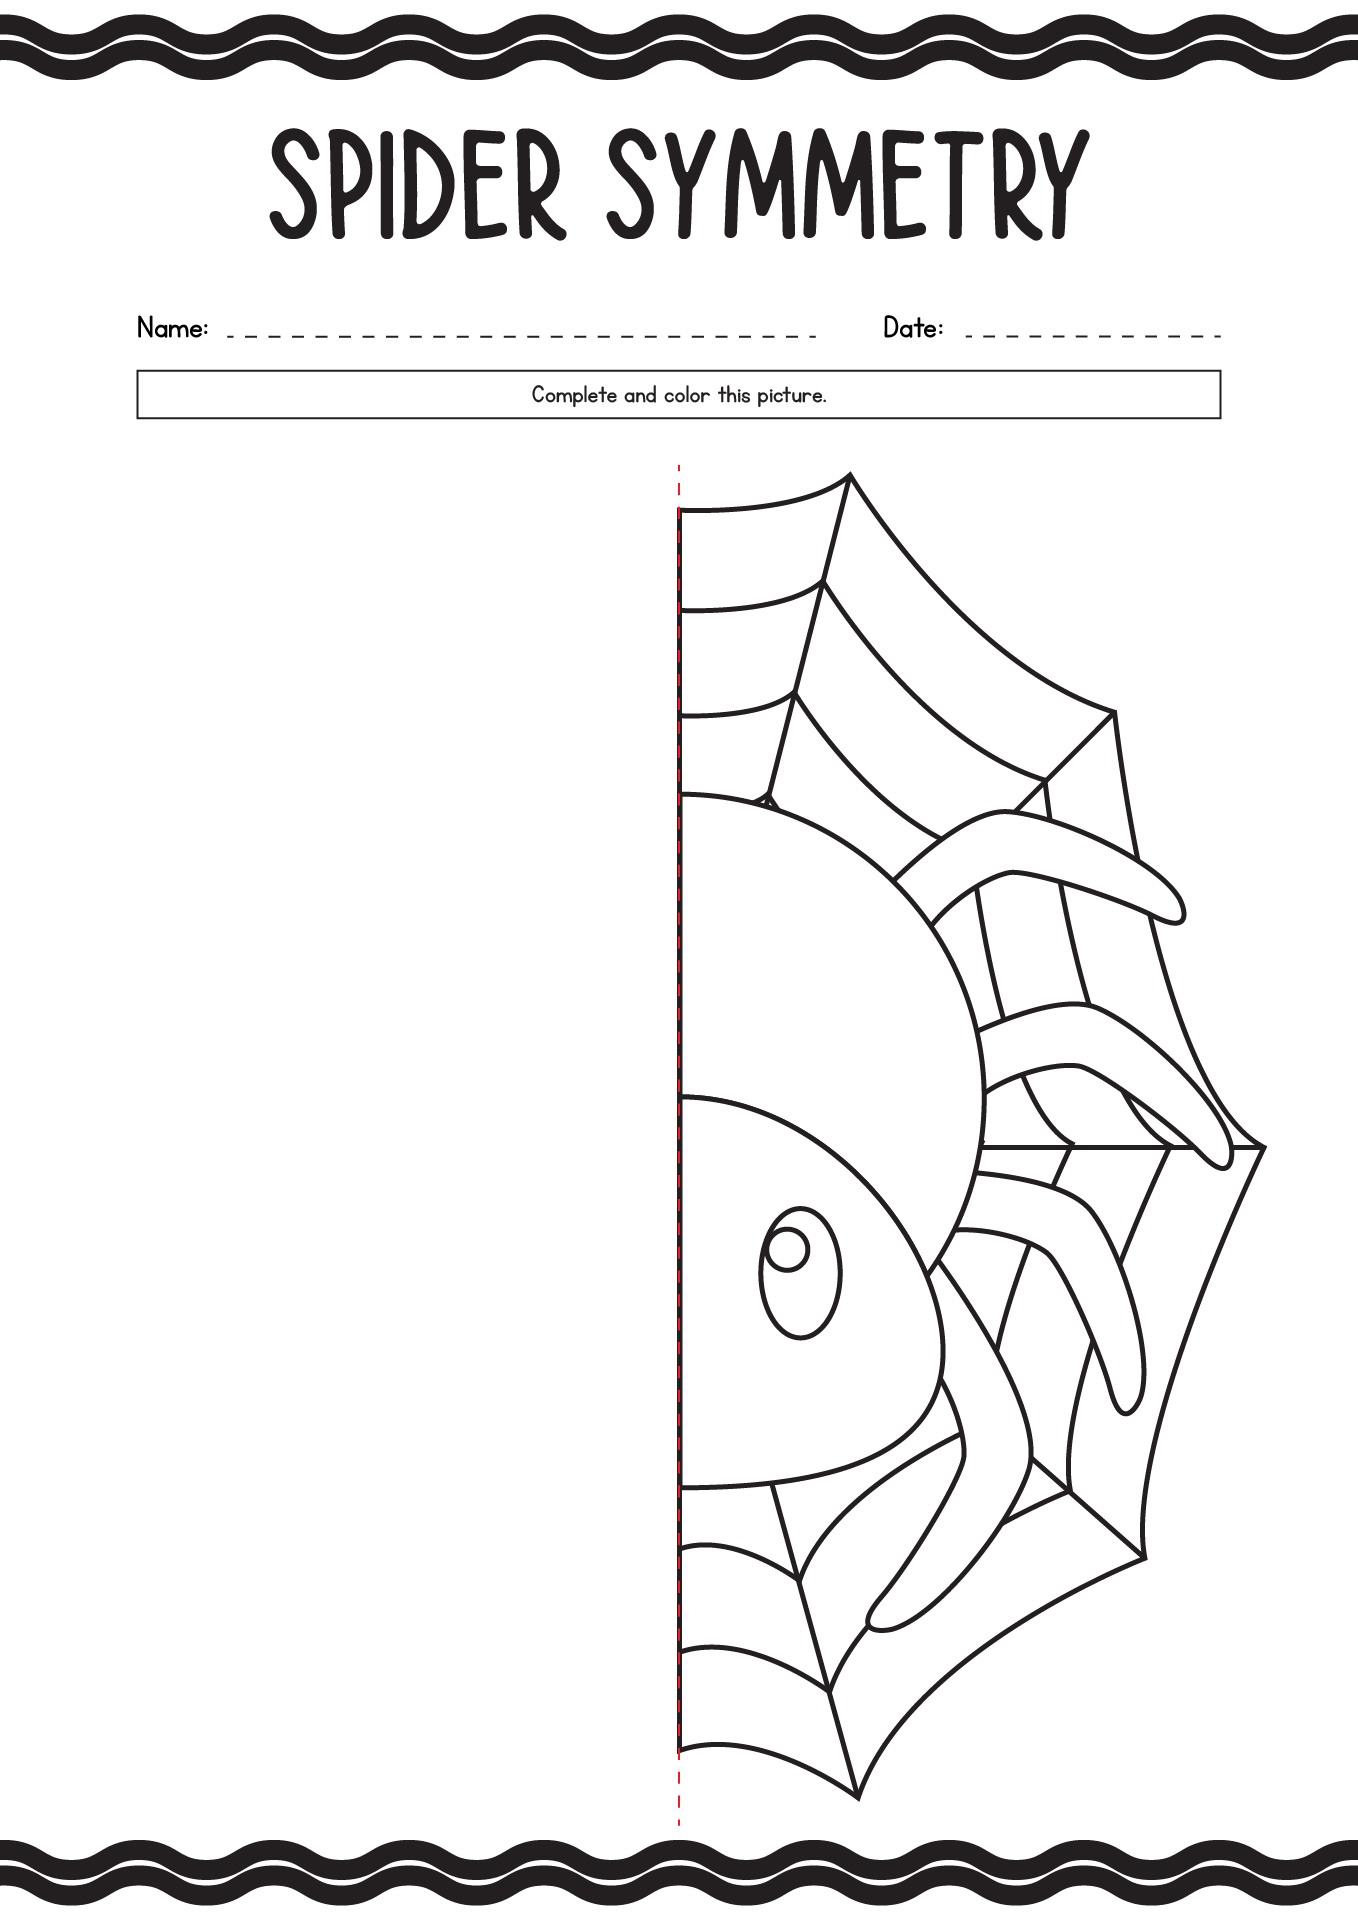 Spider Symmetry Coloring Page